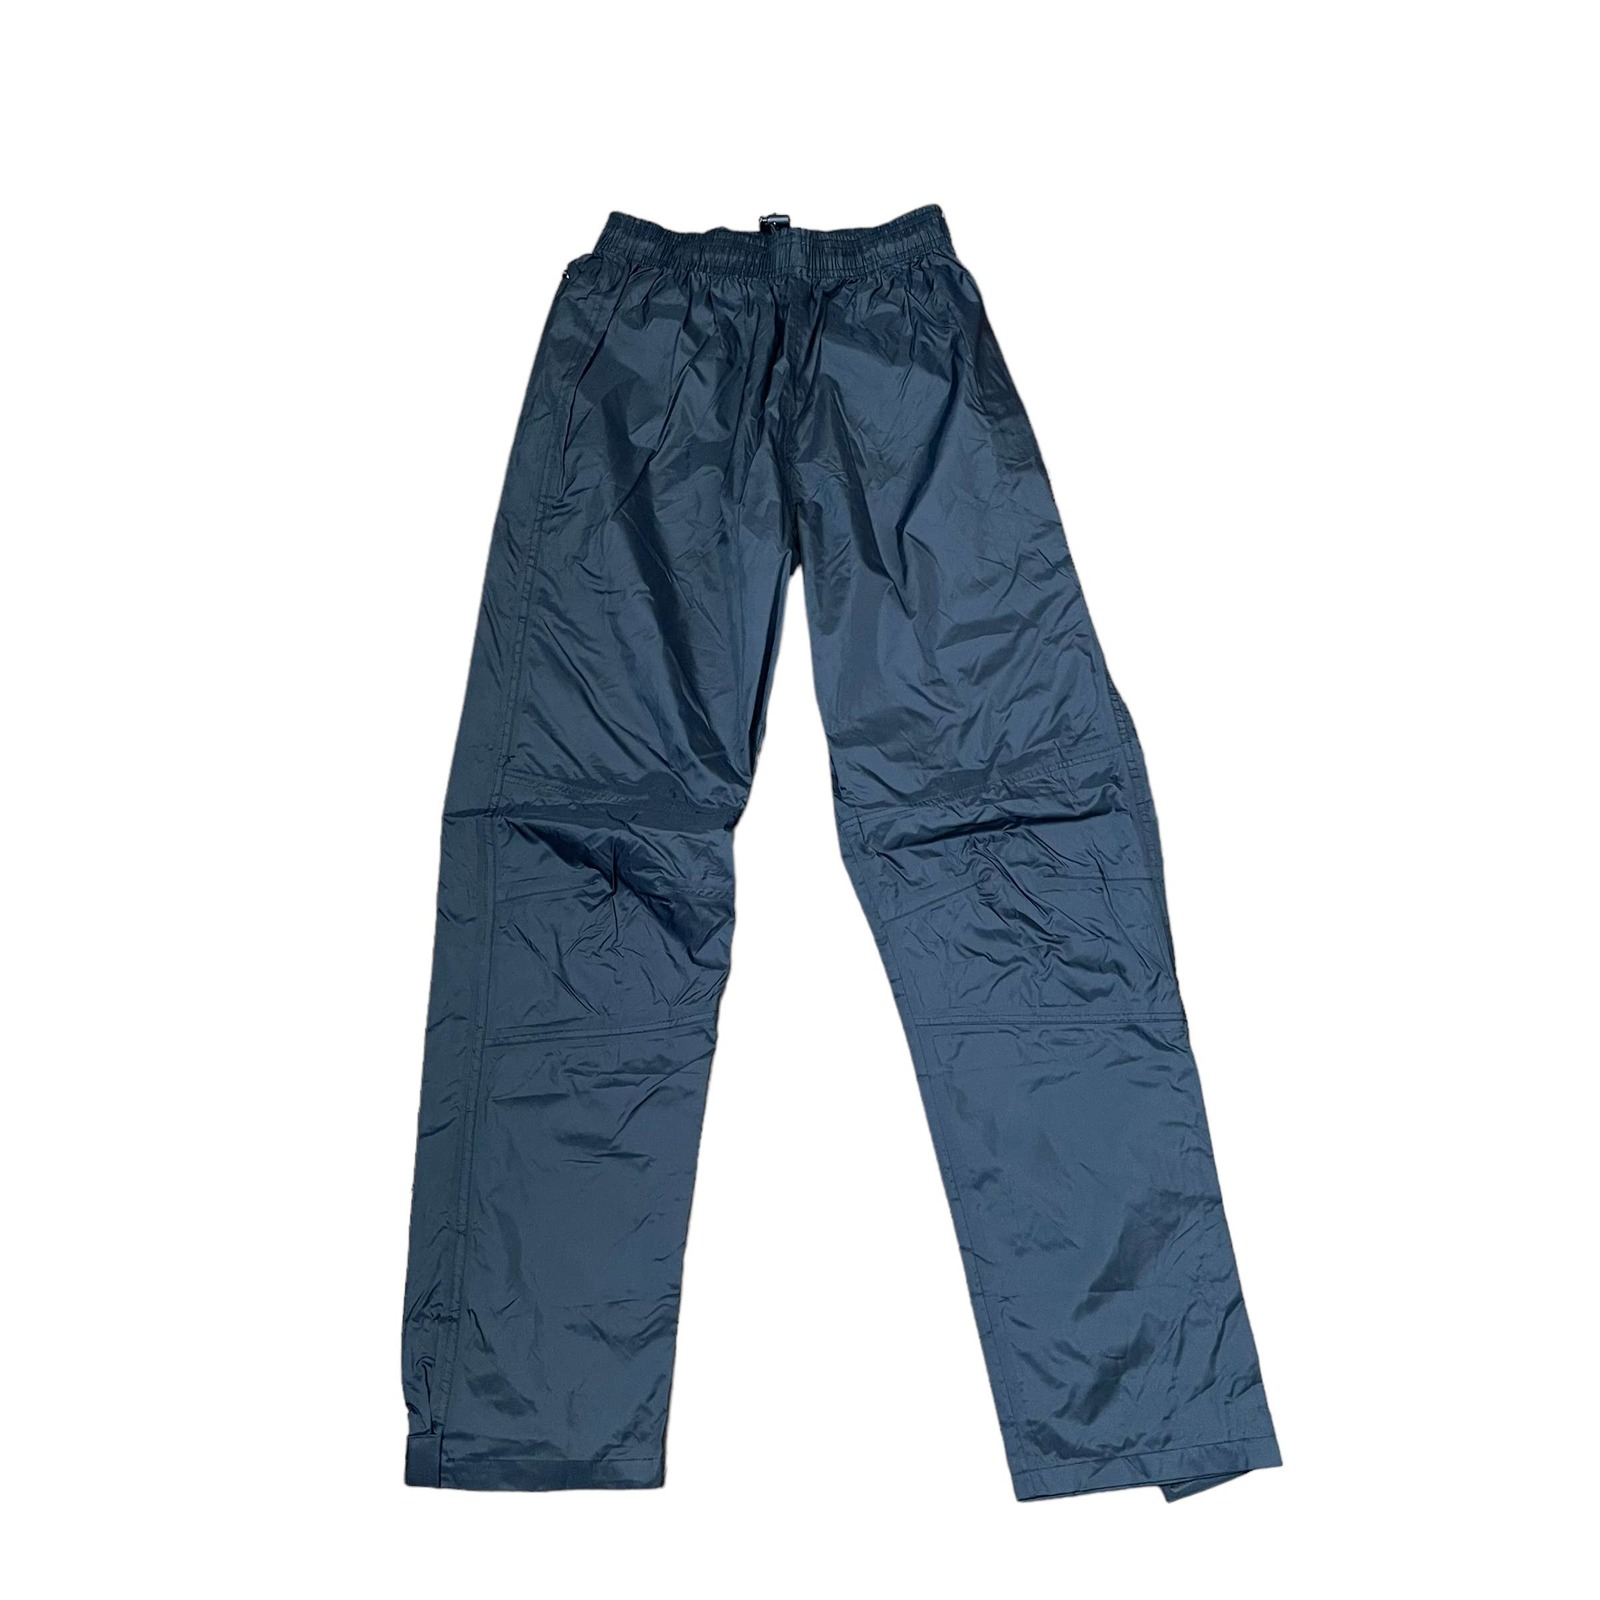 Primary image for Magellan Outdoors Pants Size Small Black Pull On 100% Nylon Fishing 24X29 